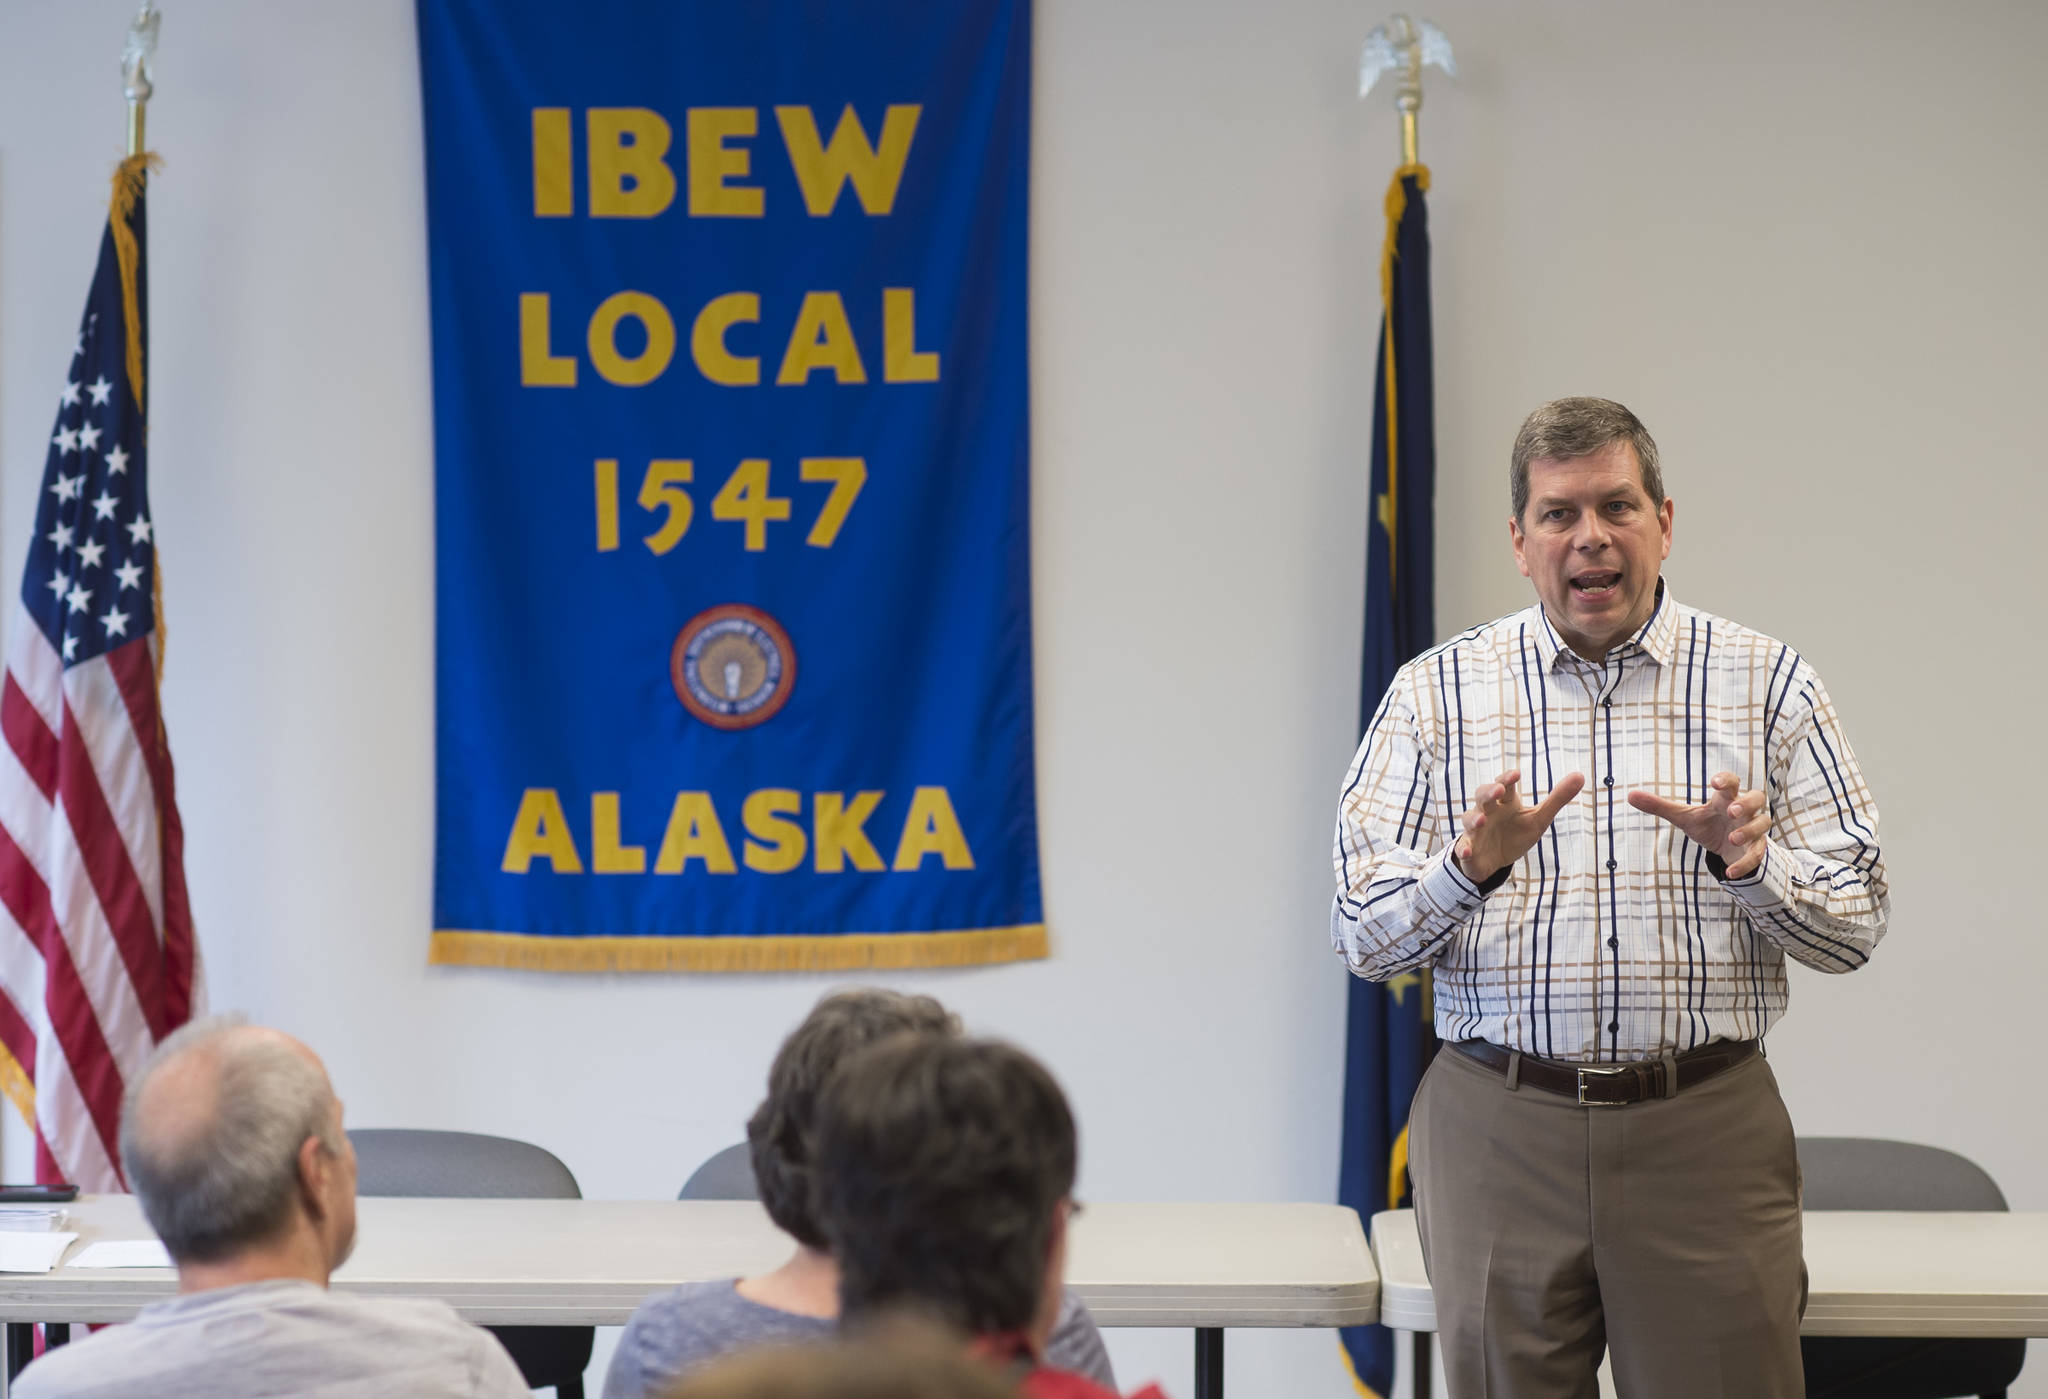 Former Alaska U.S. Senator Mark Begich greets and speaks to Juneau residents interested in his campaign for governor at the IBEW Local 1547 Union office on Thursday, June 29, 2018. (Michael Penn | Juneau Empire)